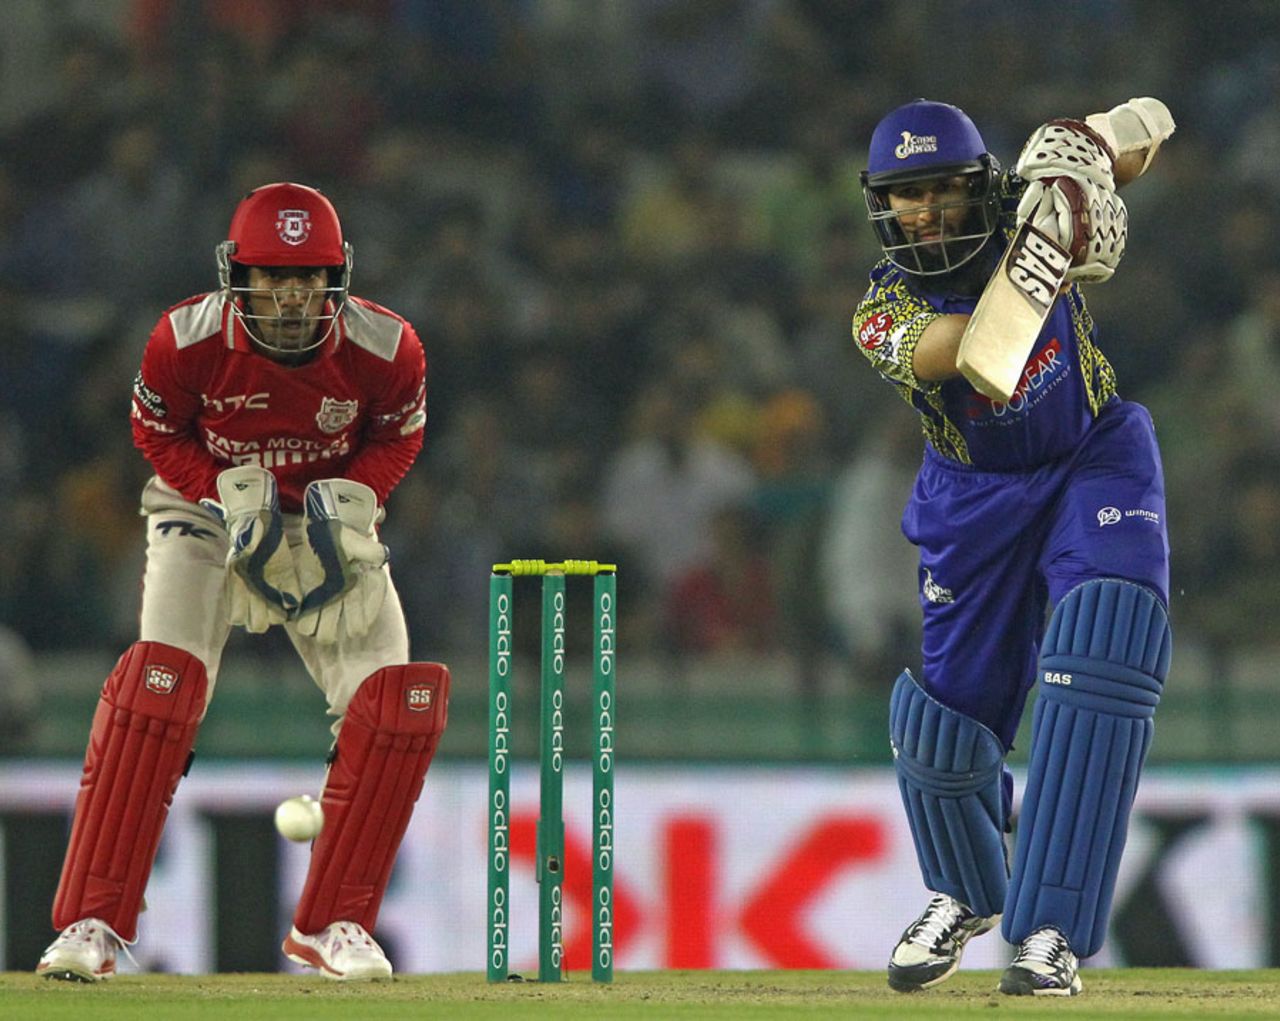 Hashim Amla struck seven fours in his 22-ball 40, Cape Cobras v Kings XI Punjab, Champions League T20, Group B, Mohali, September 28, 2014